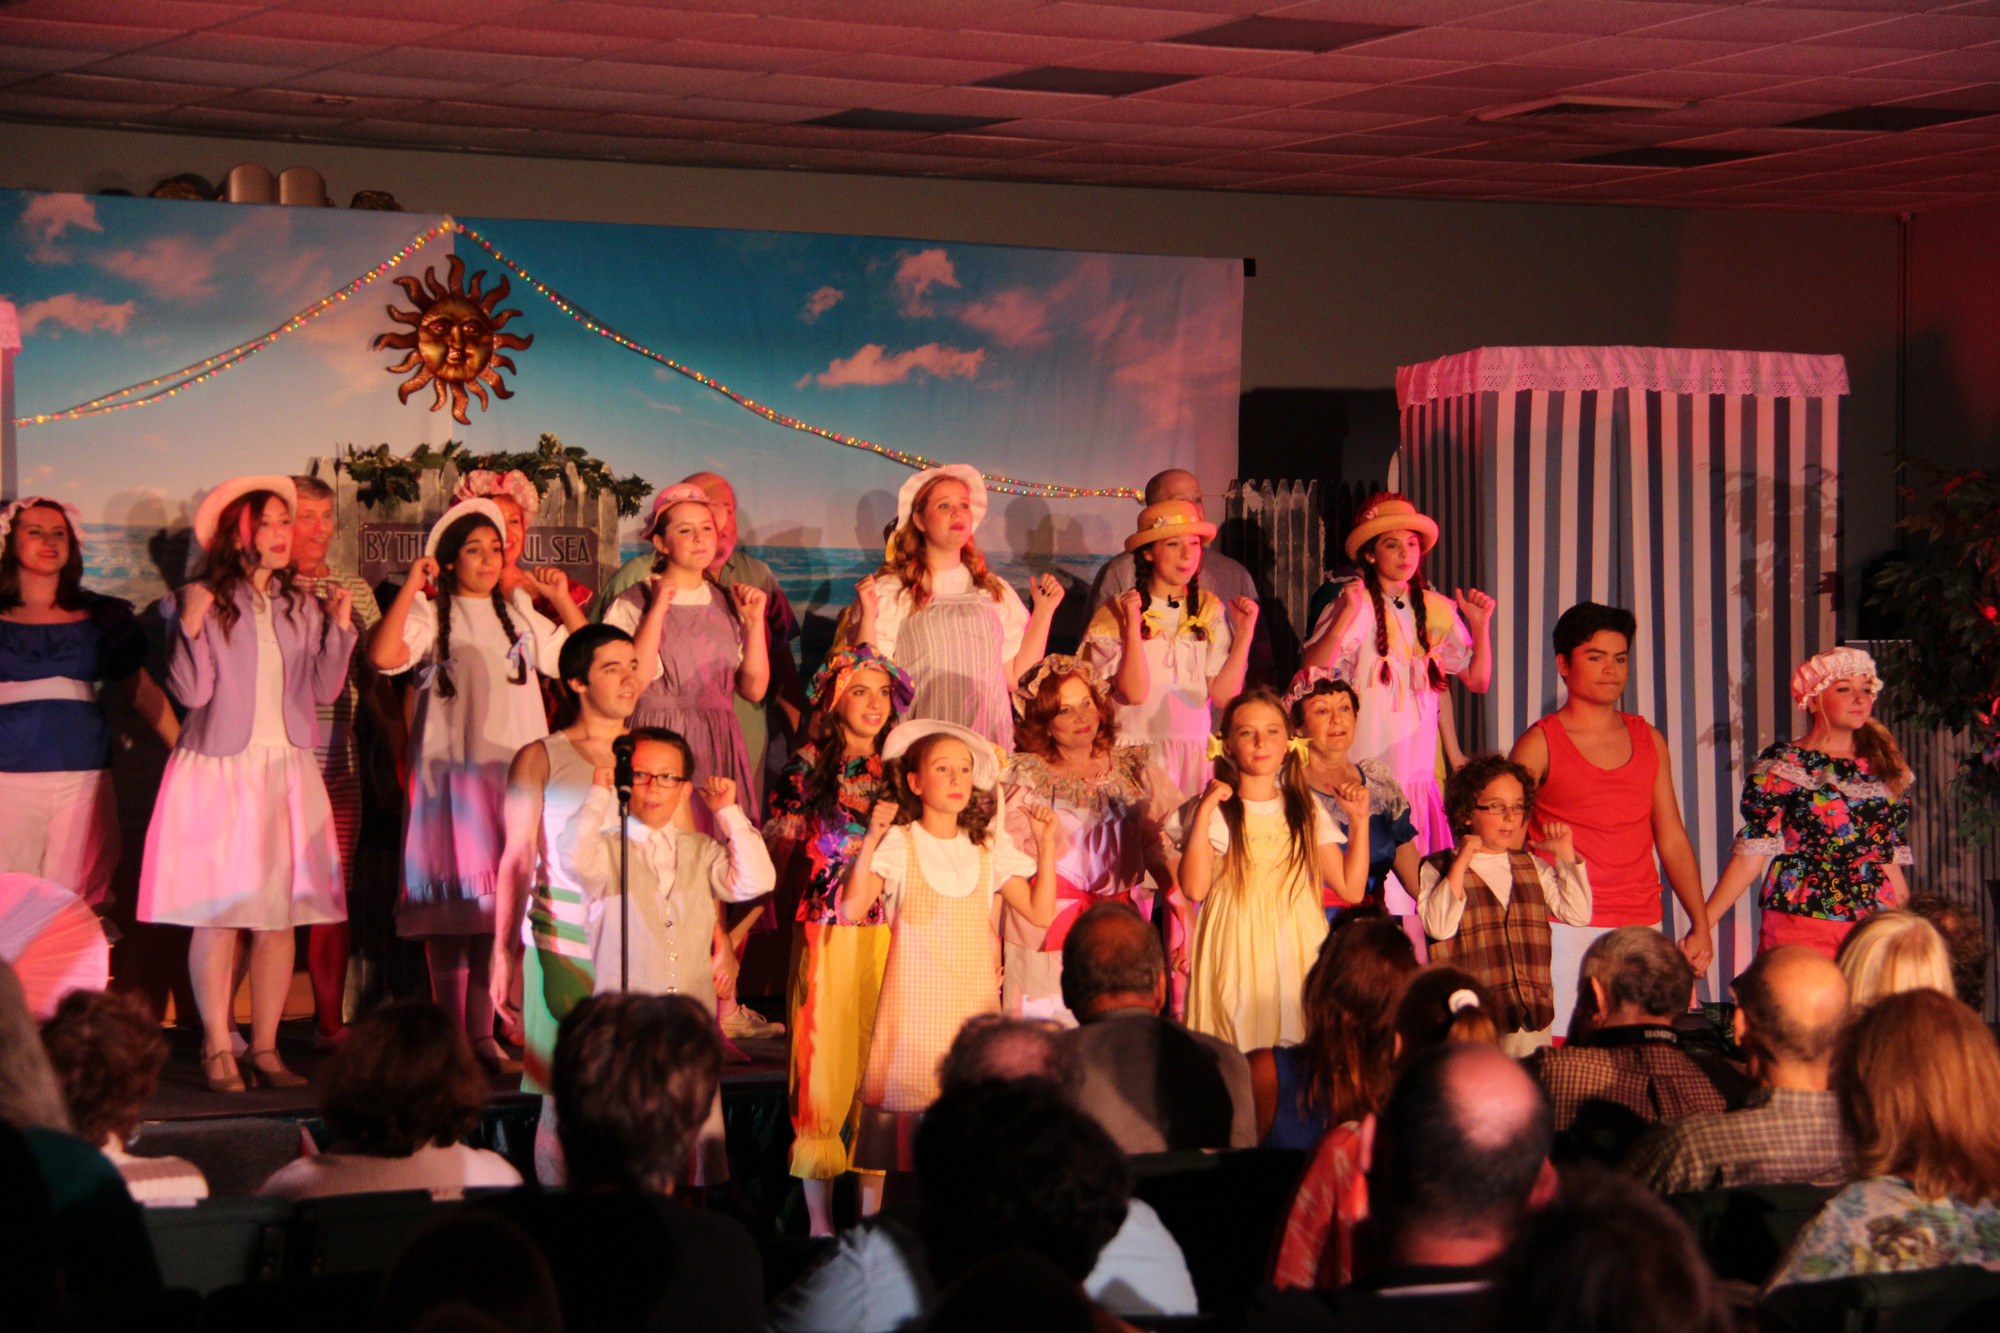 The cast of “A South Shore Summer” included Oceanside High School students and guest artists with Broadway backgrounds.